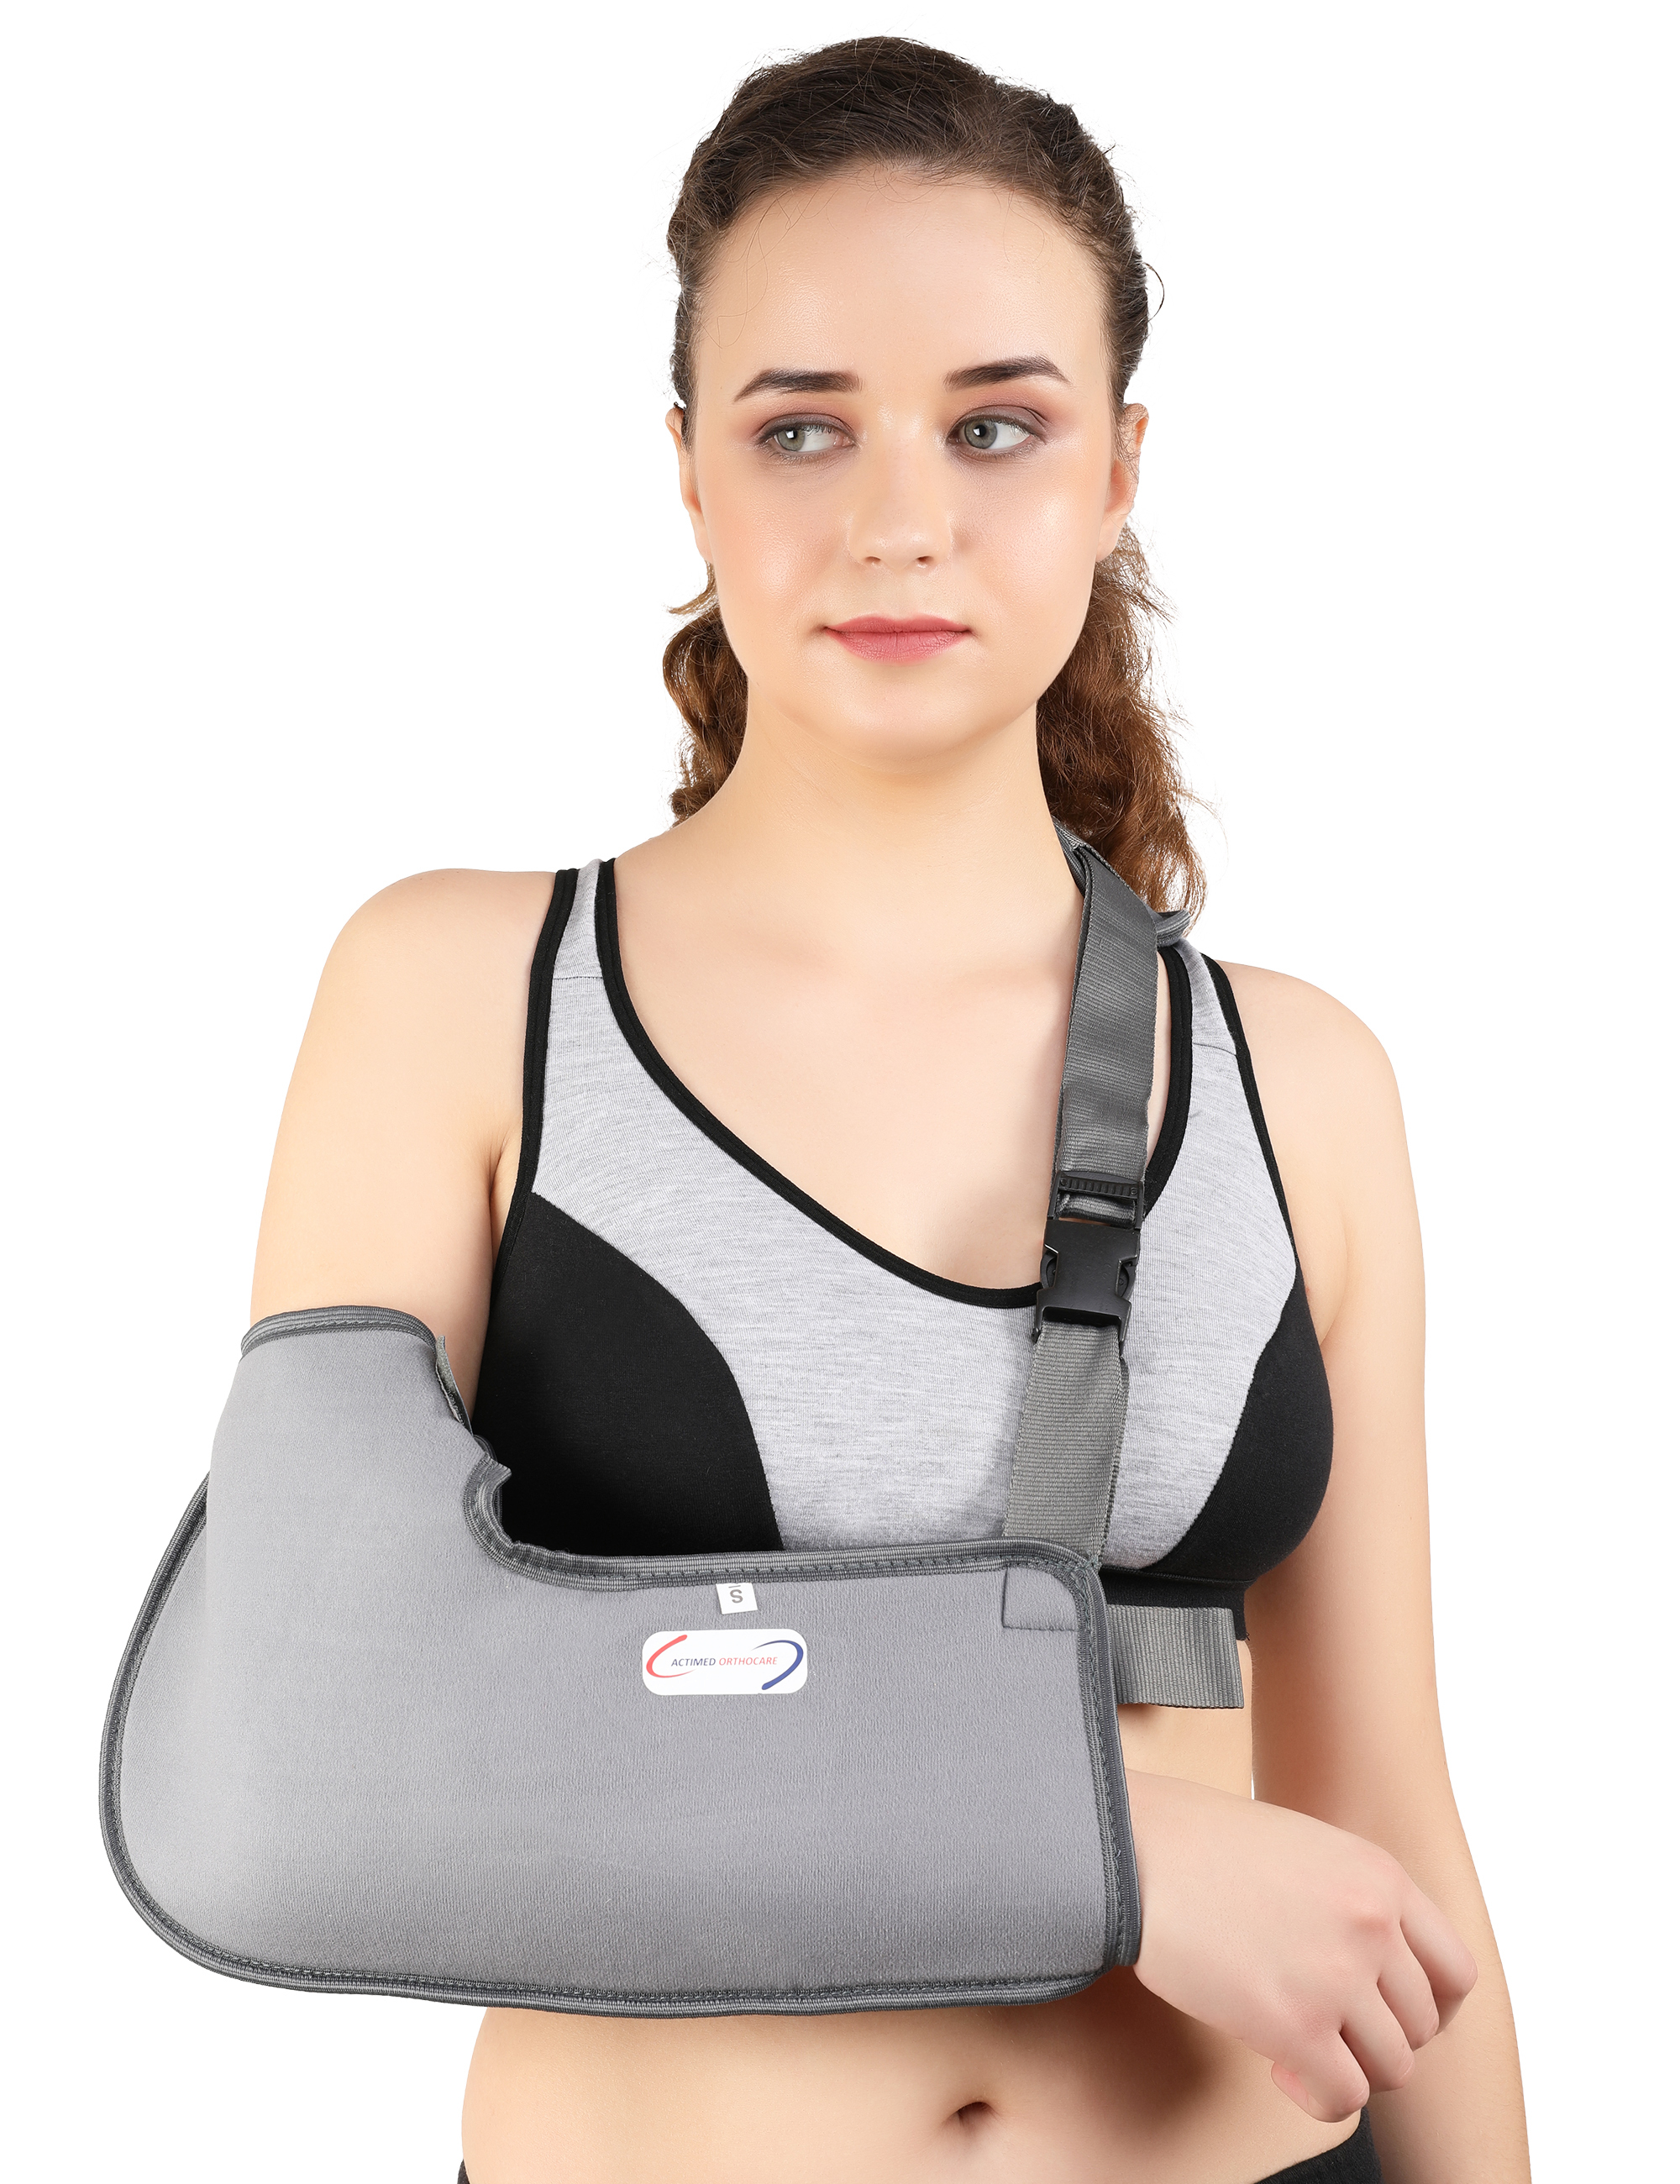 Pouch arm sling